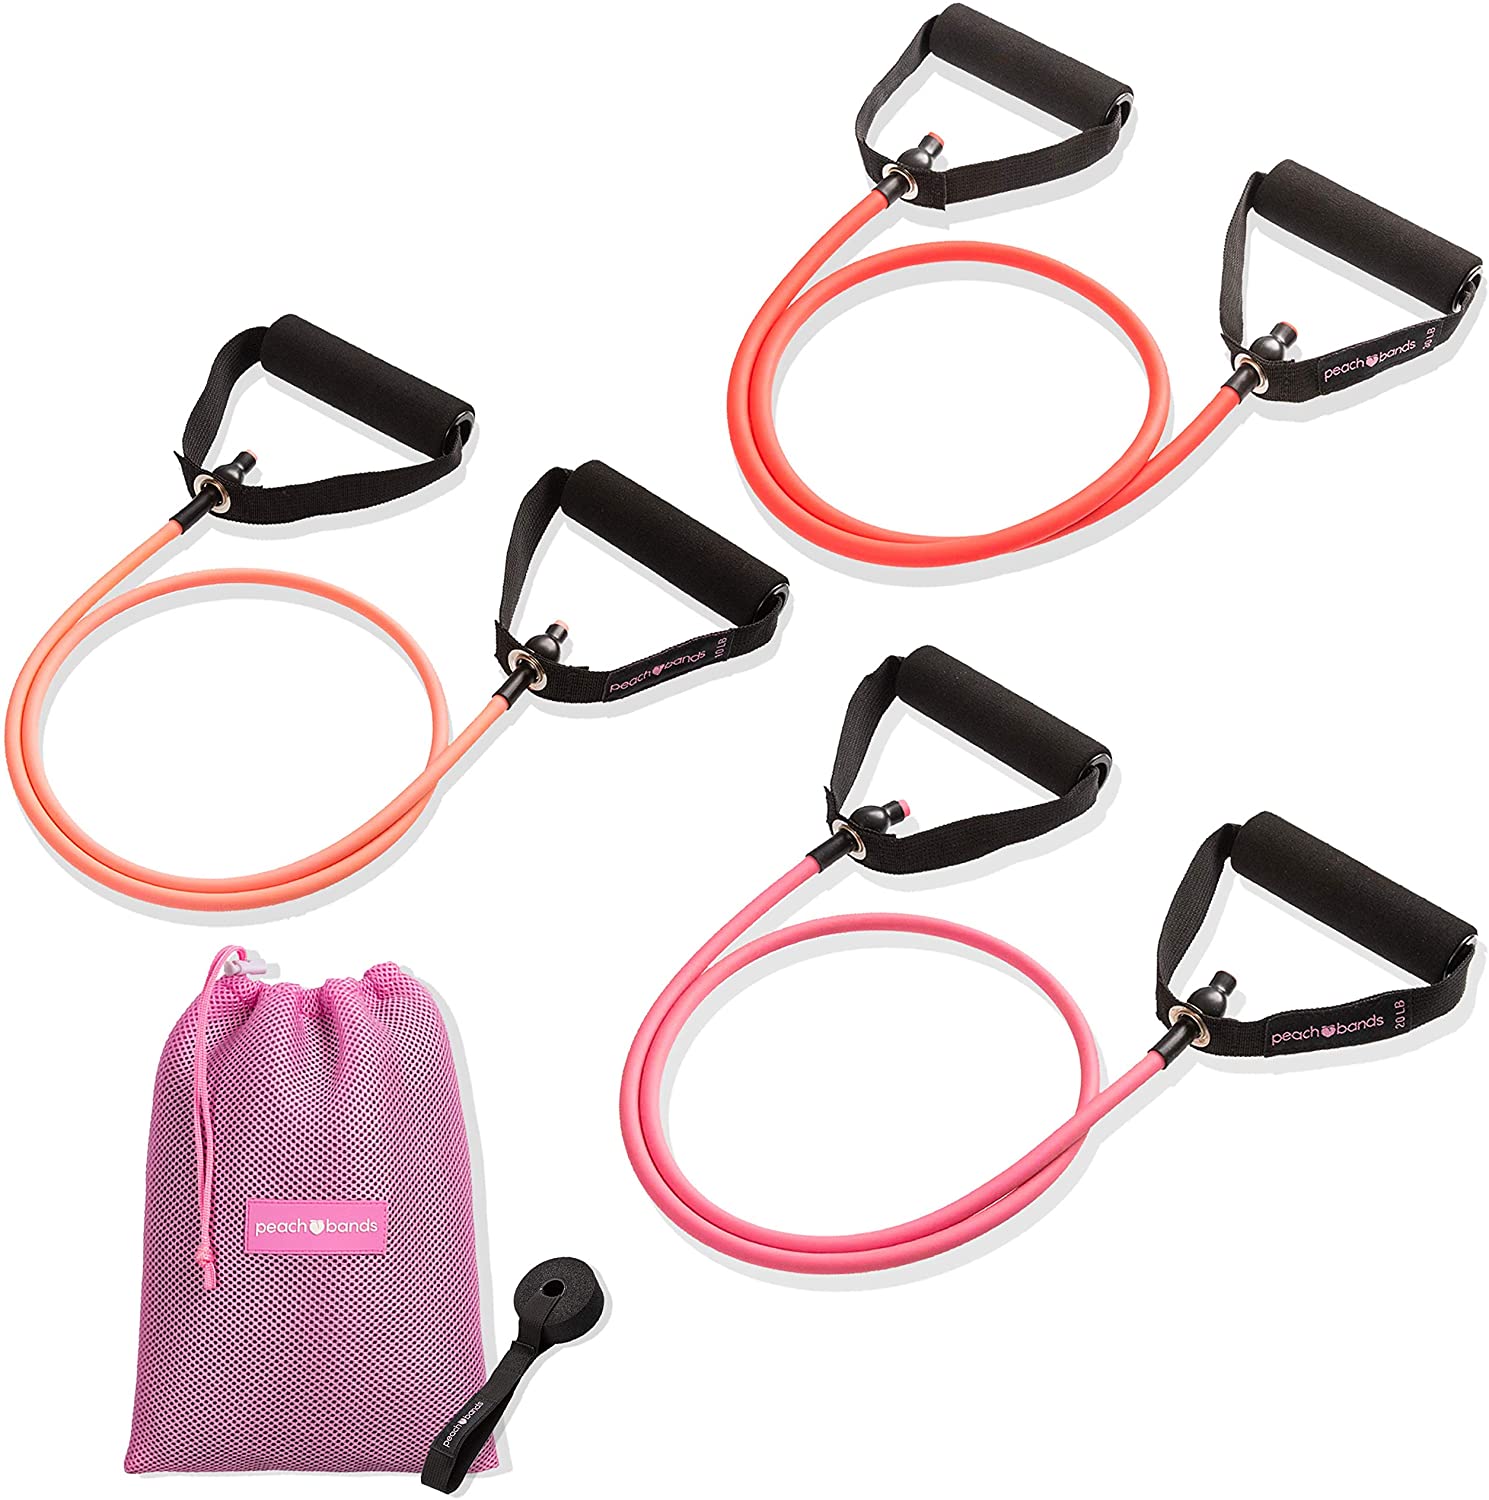 Peach Bands resistance bands